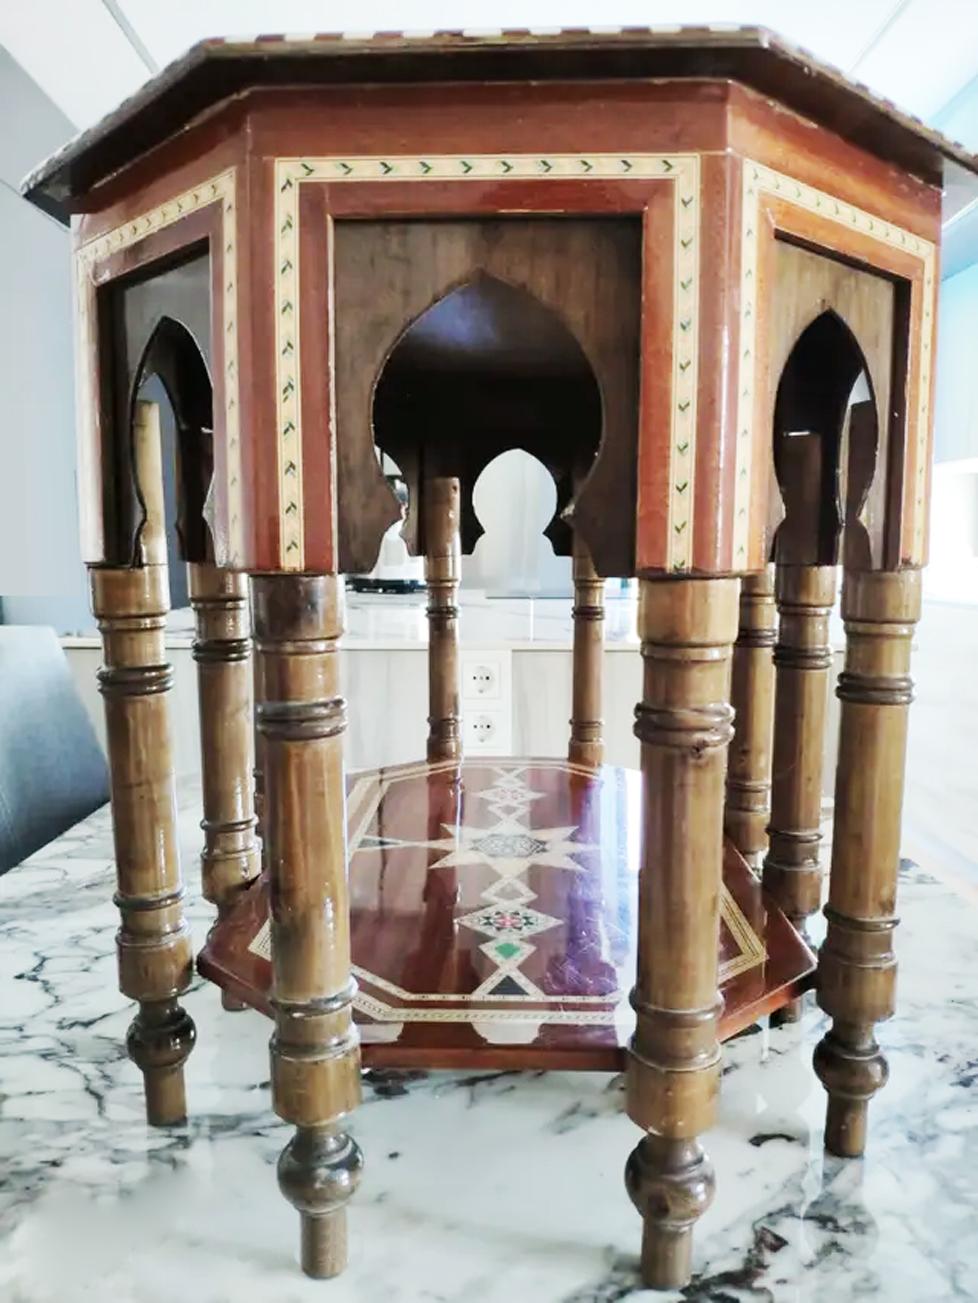 Table with very decorative Moorish inlays from the 20th century in a hexagonal shape
This leads to an arched frieze of temple design. The turned legs rest on a star embedded in the base.

This table is in good condition, central star at the base,